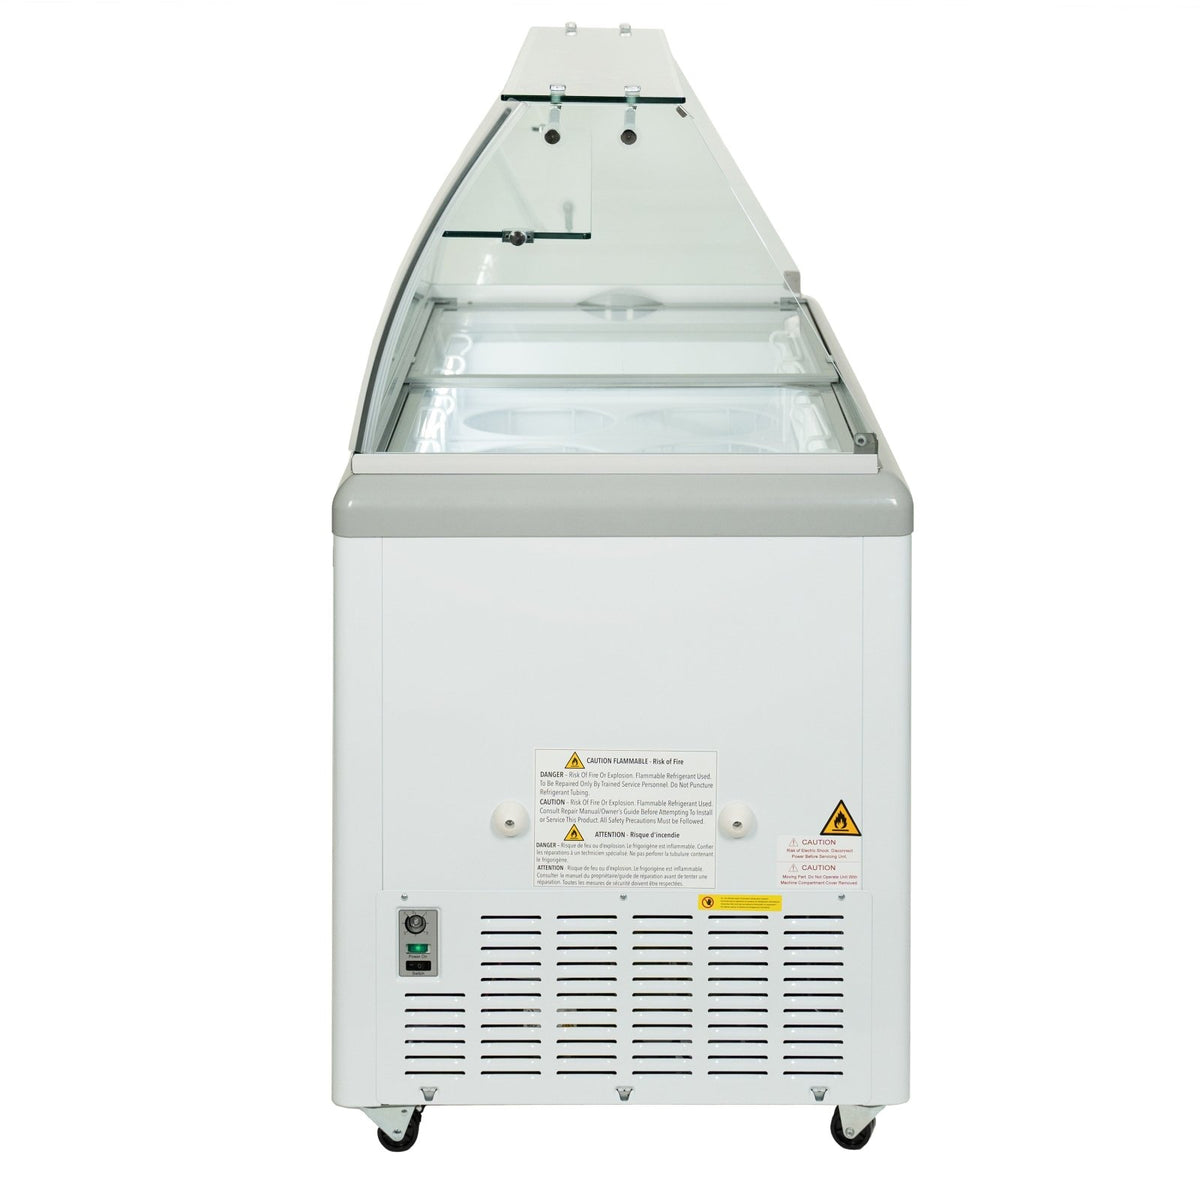 Maxx Cold MXDC - 8 X - Series Ice Cream Dipping Cabinet Freezer with Curved Glass Sneeze Guard, 52"W, 11 cu. ft. Storage Capacity, Holds up to - TheChefStore.Com